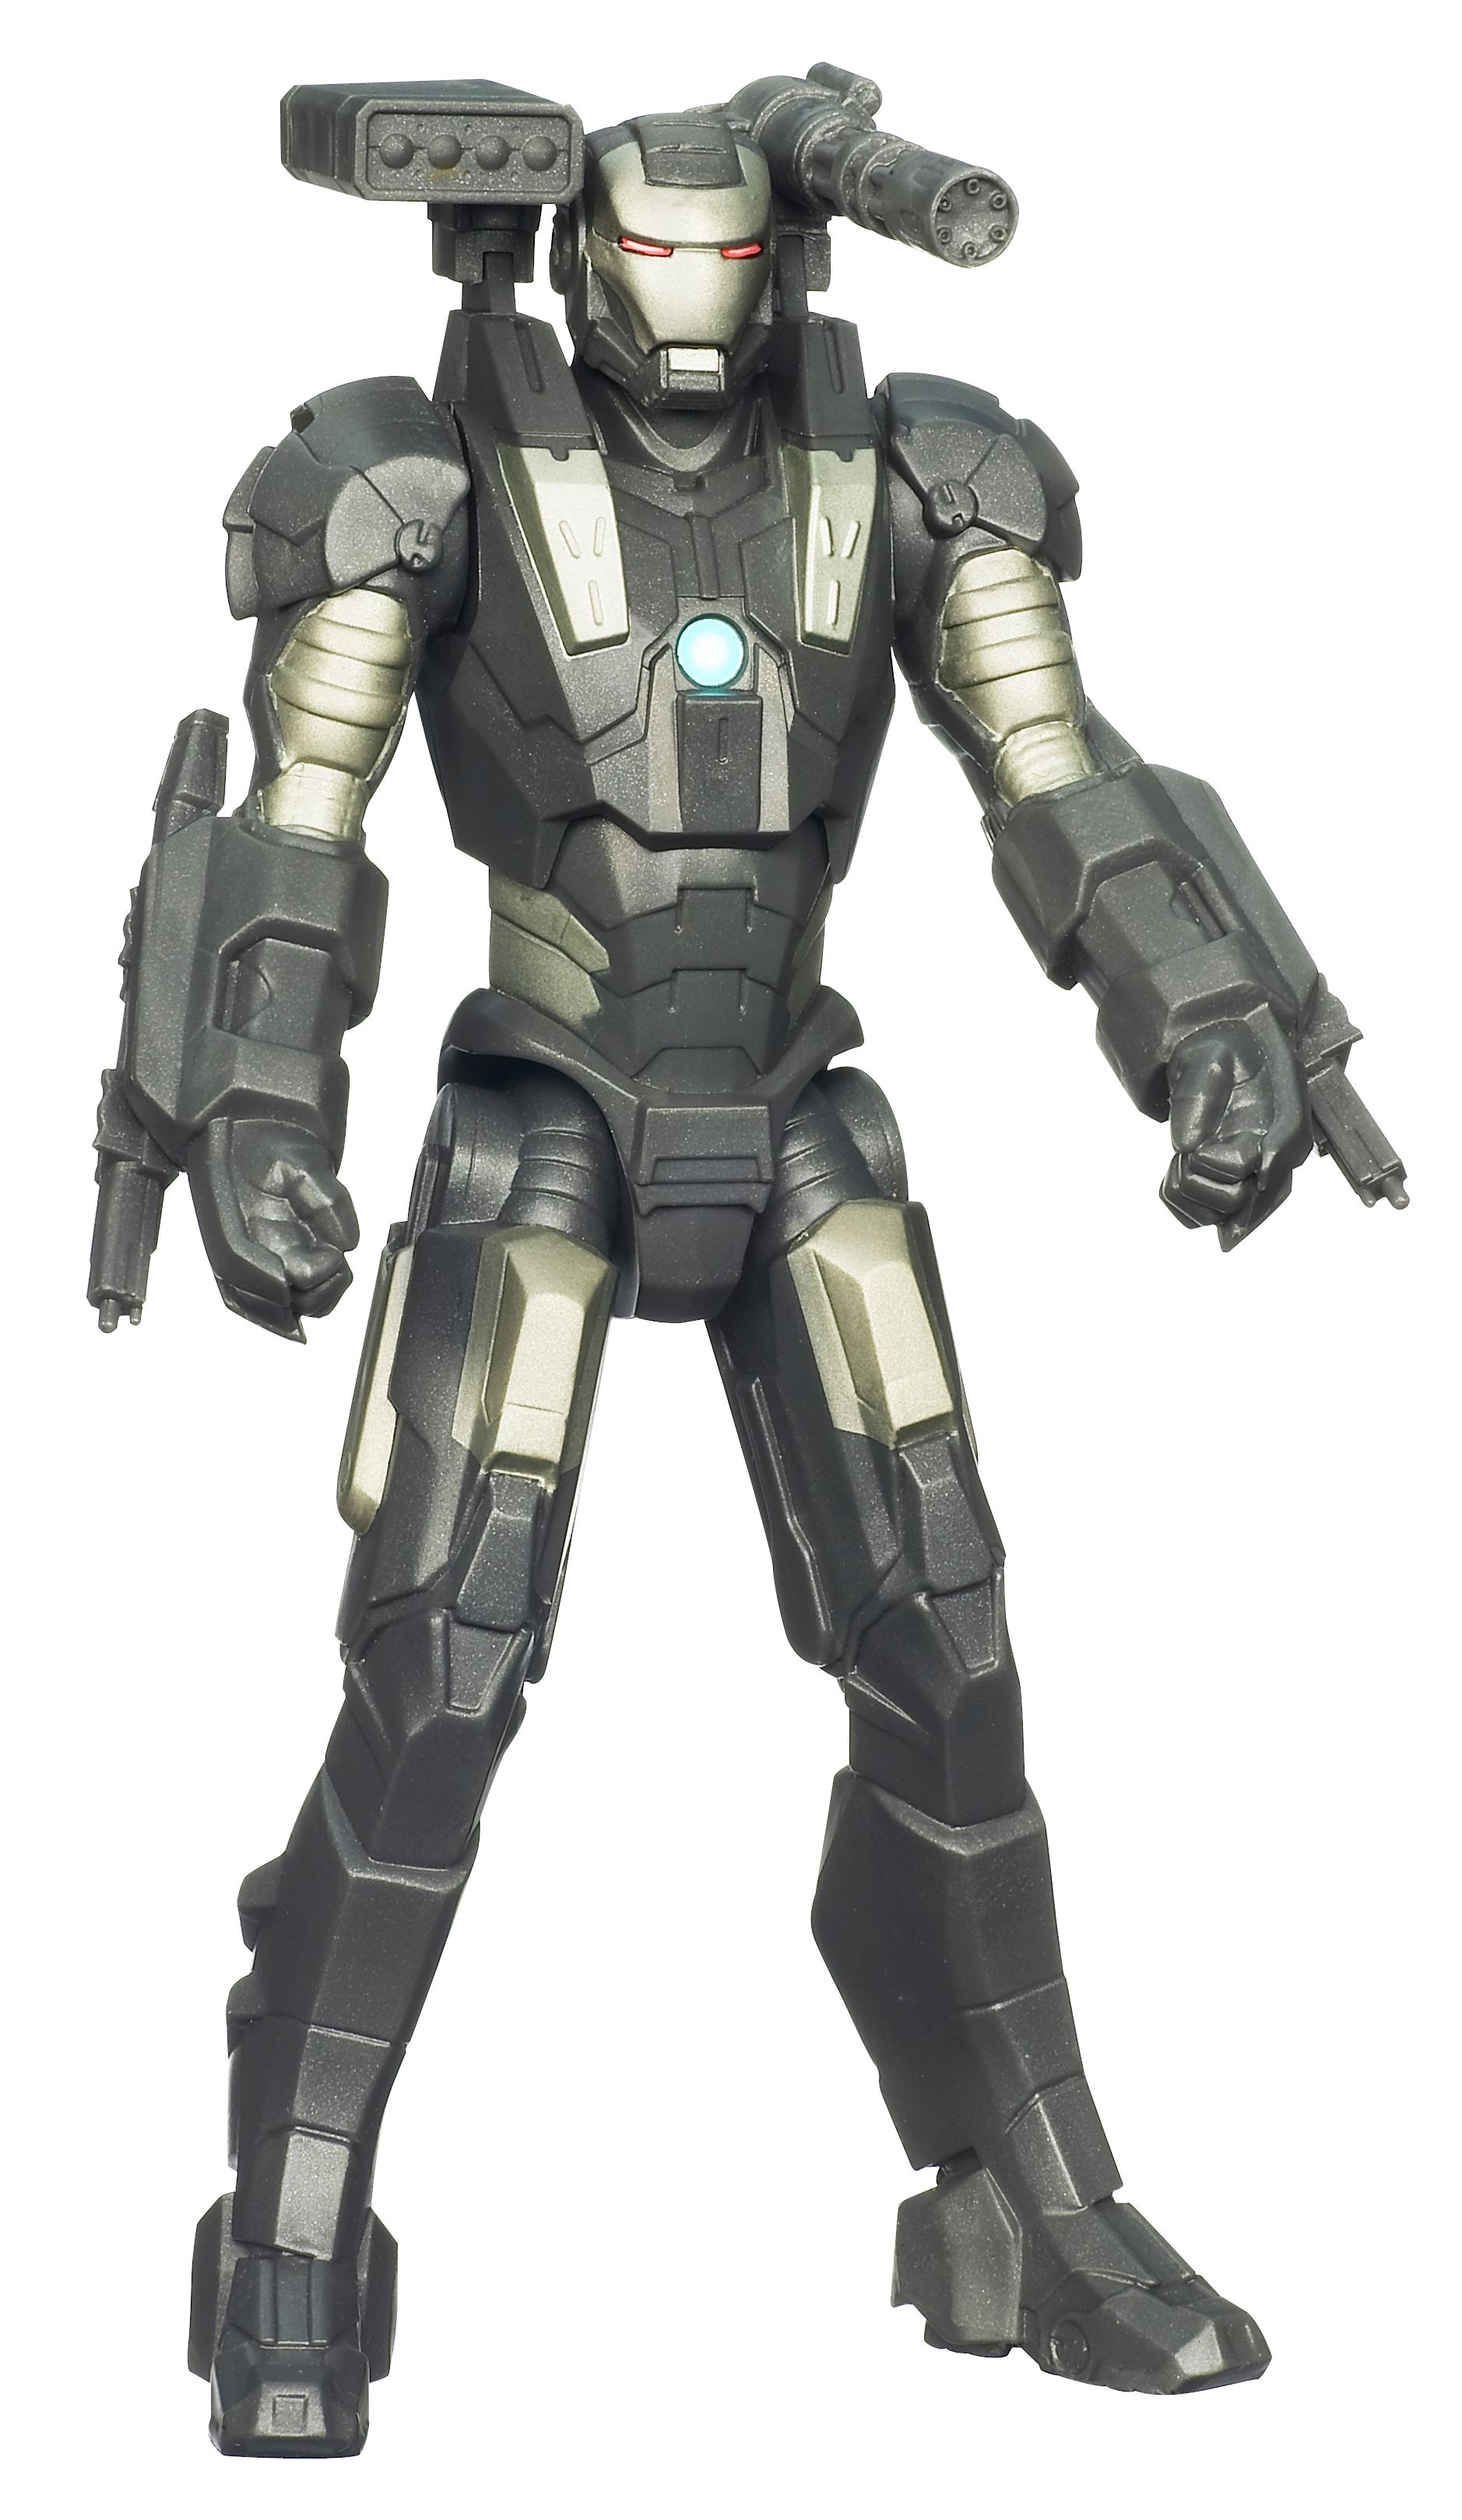 All the New IRON MAN 2 Toys in High Resolution Including the Mark I-IV and Whiplash ...1878 x 3238